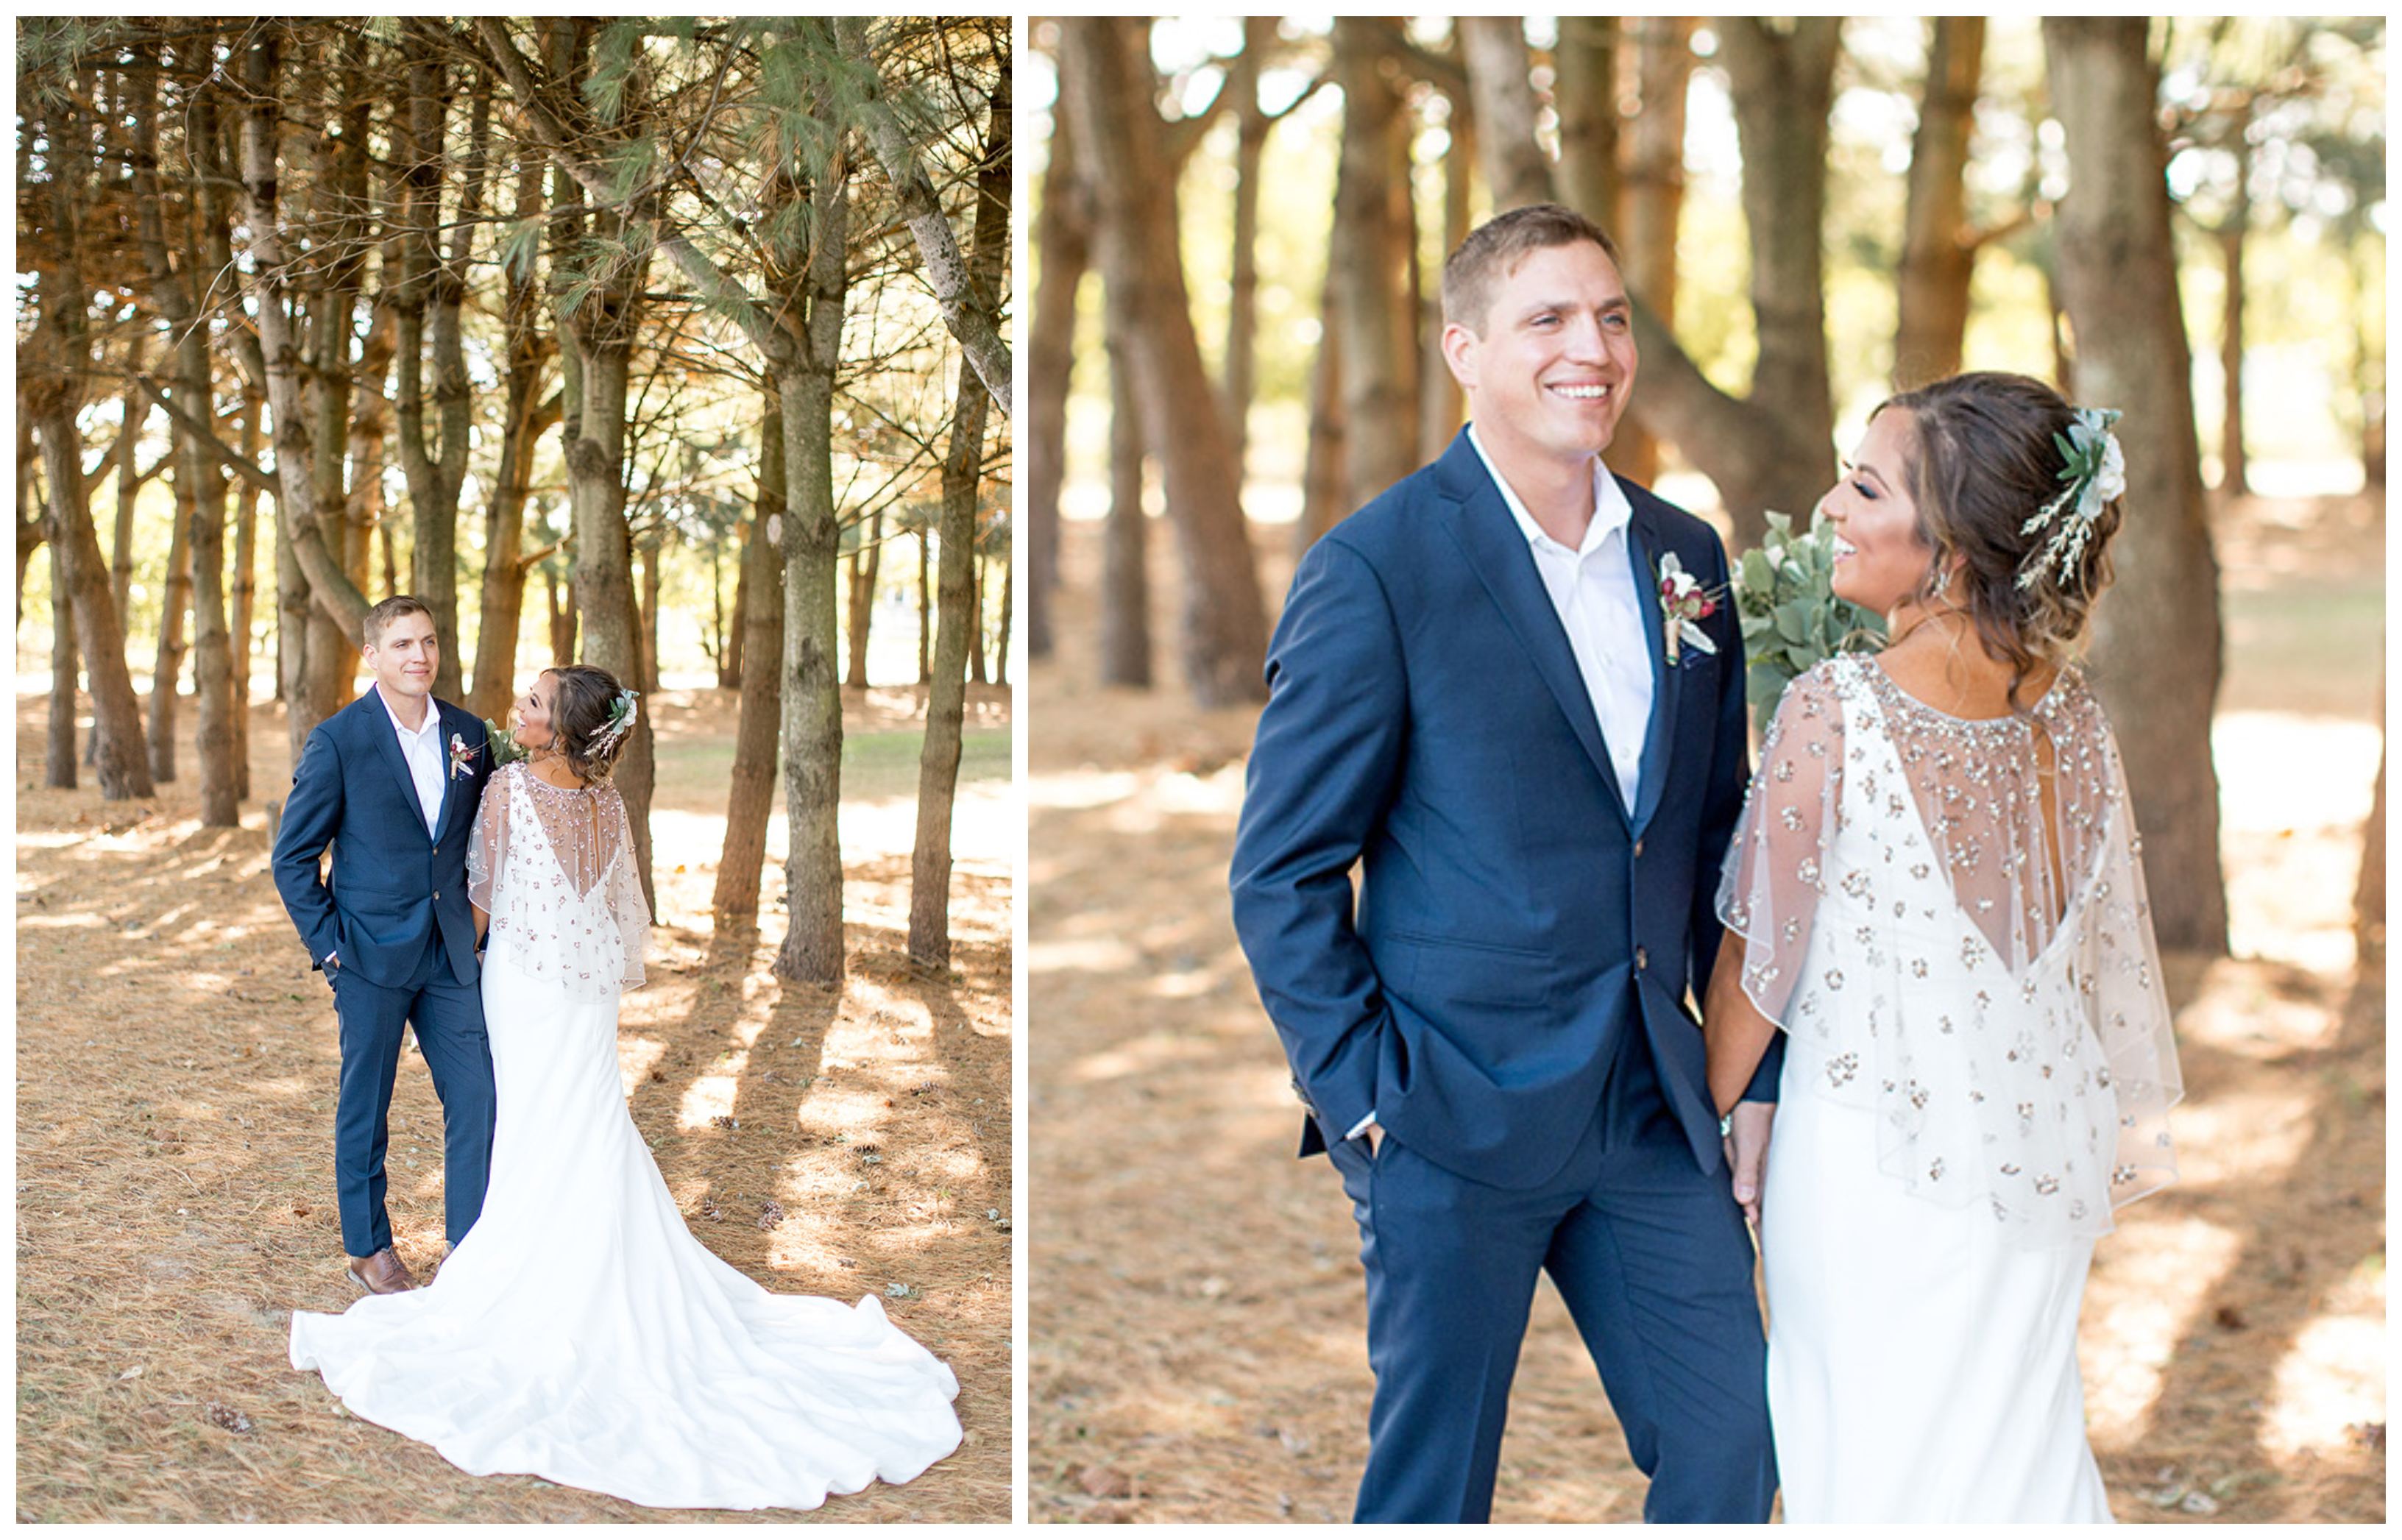 Bride and groom wedding portraits in a pine grove